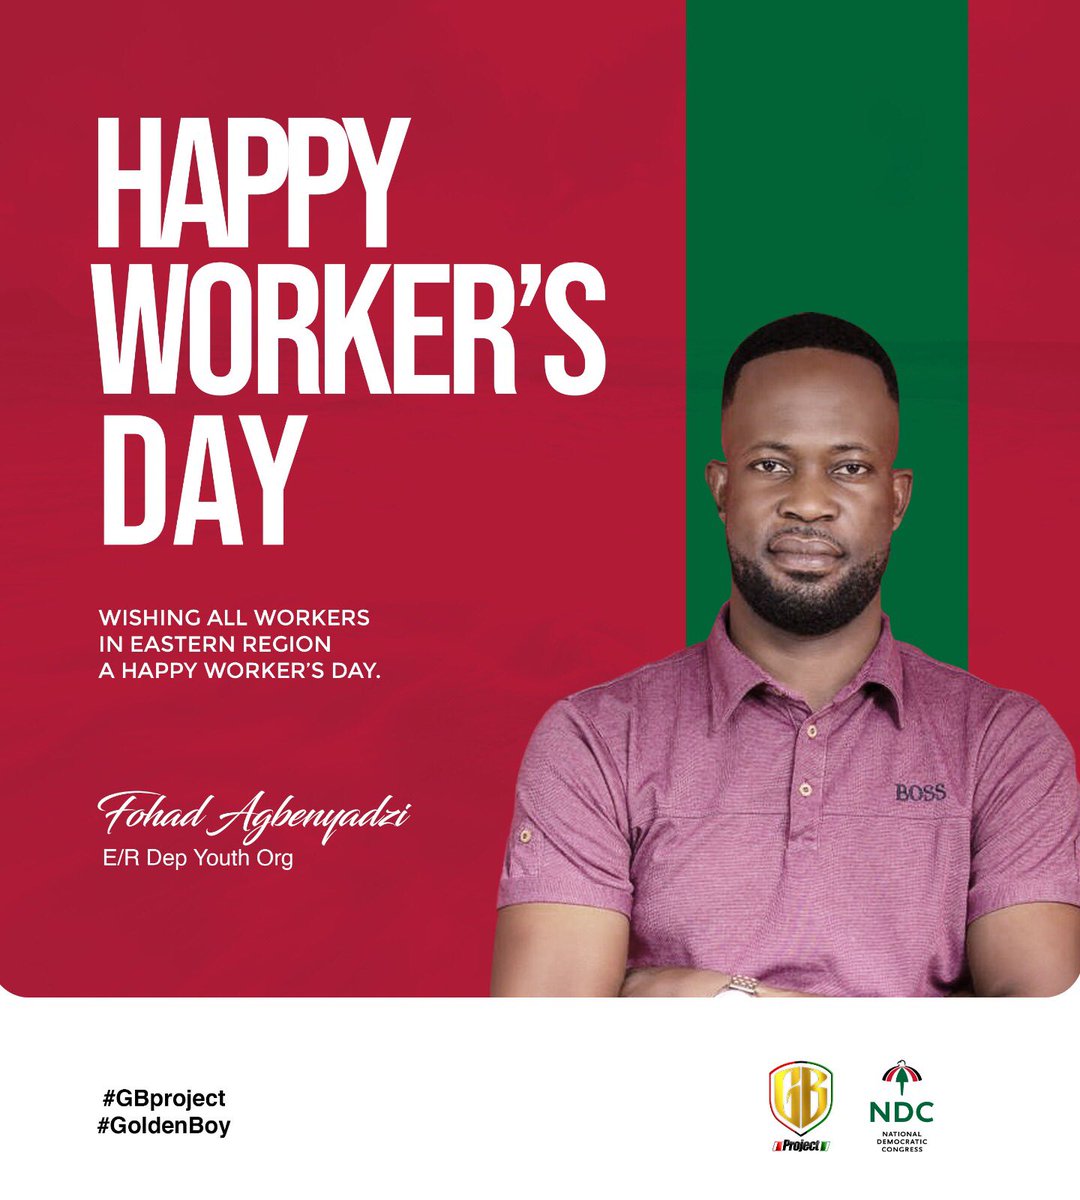 Commander Fohad rallies for Workers' Day, honoring the diligence of Eastern Region workers and @OfficialNDCGh supporters. Despite economic hurdles, hope prevails. With leadership like @JDMahama #24HourEconomy initiative, Ghana's future shines bright. #GBproject #GoldenBoy